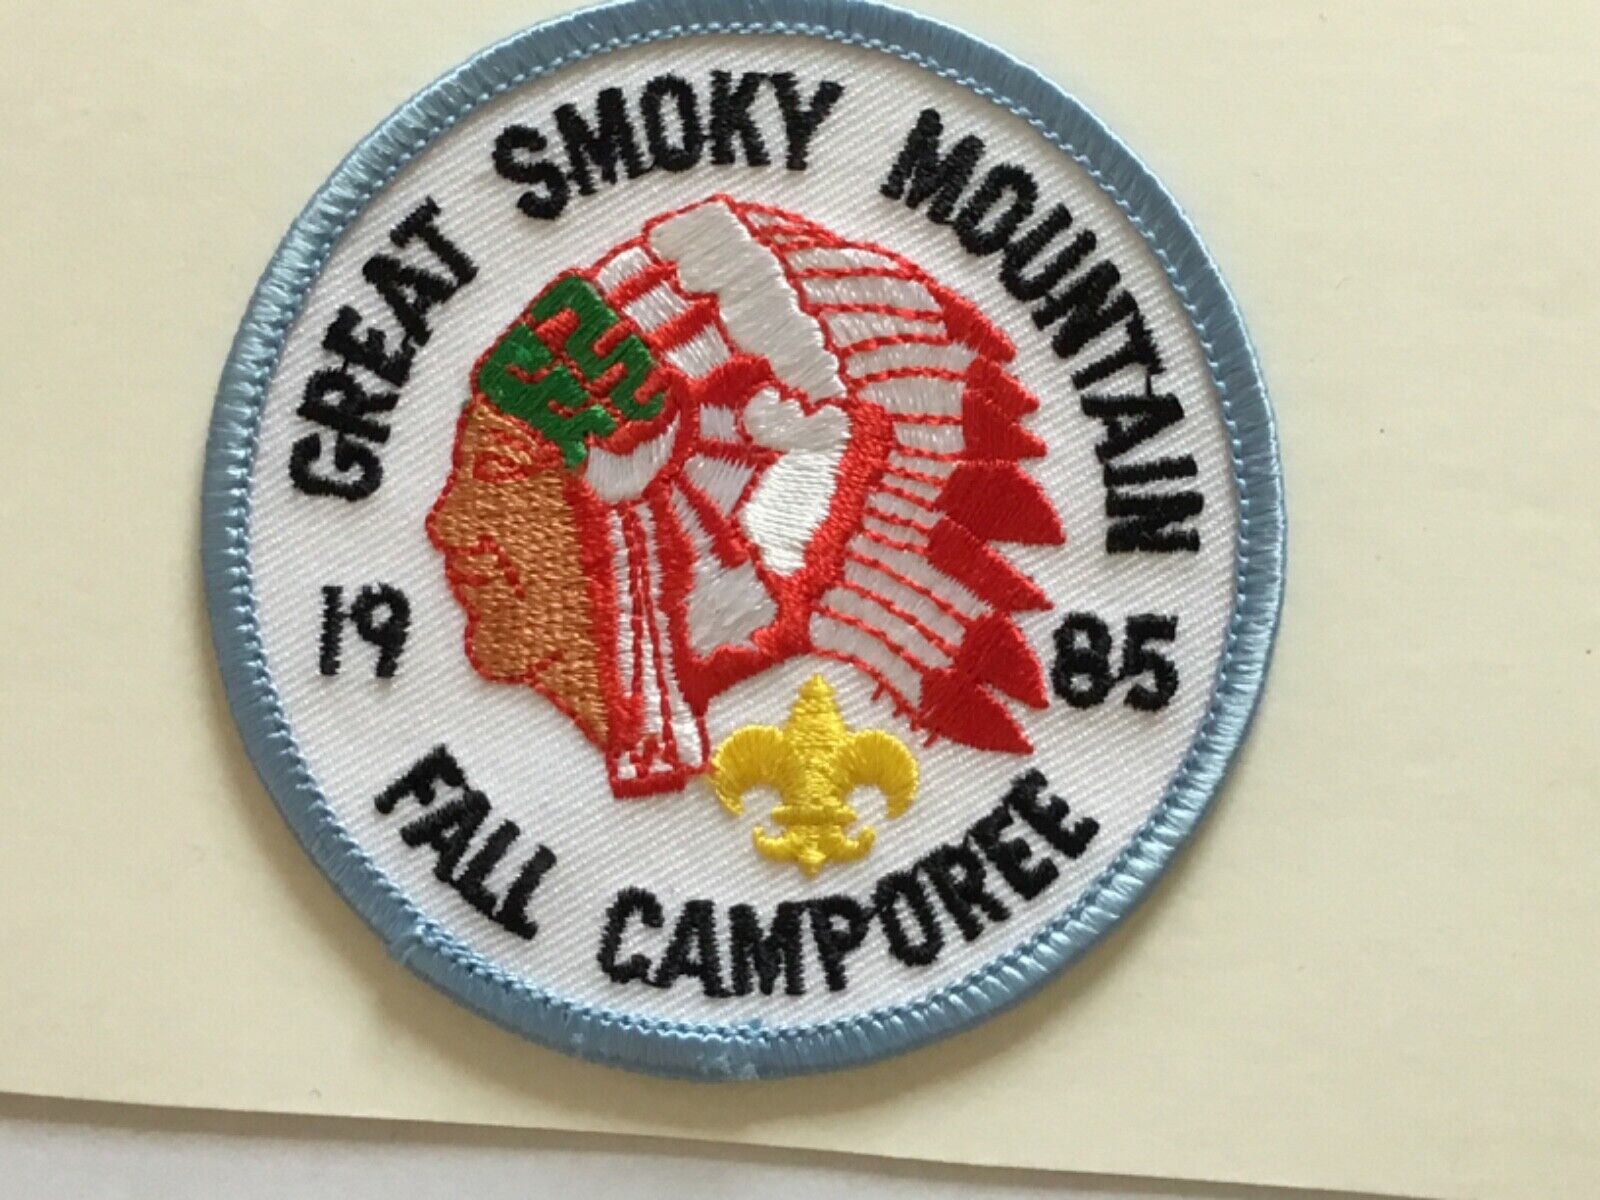 1985 Great Smoky Mountain Council Spring Camporee patch cs 75th Anniversary